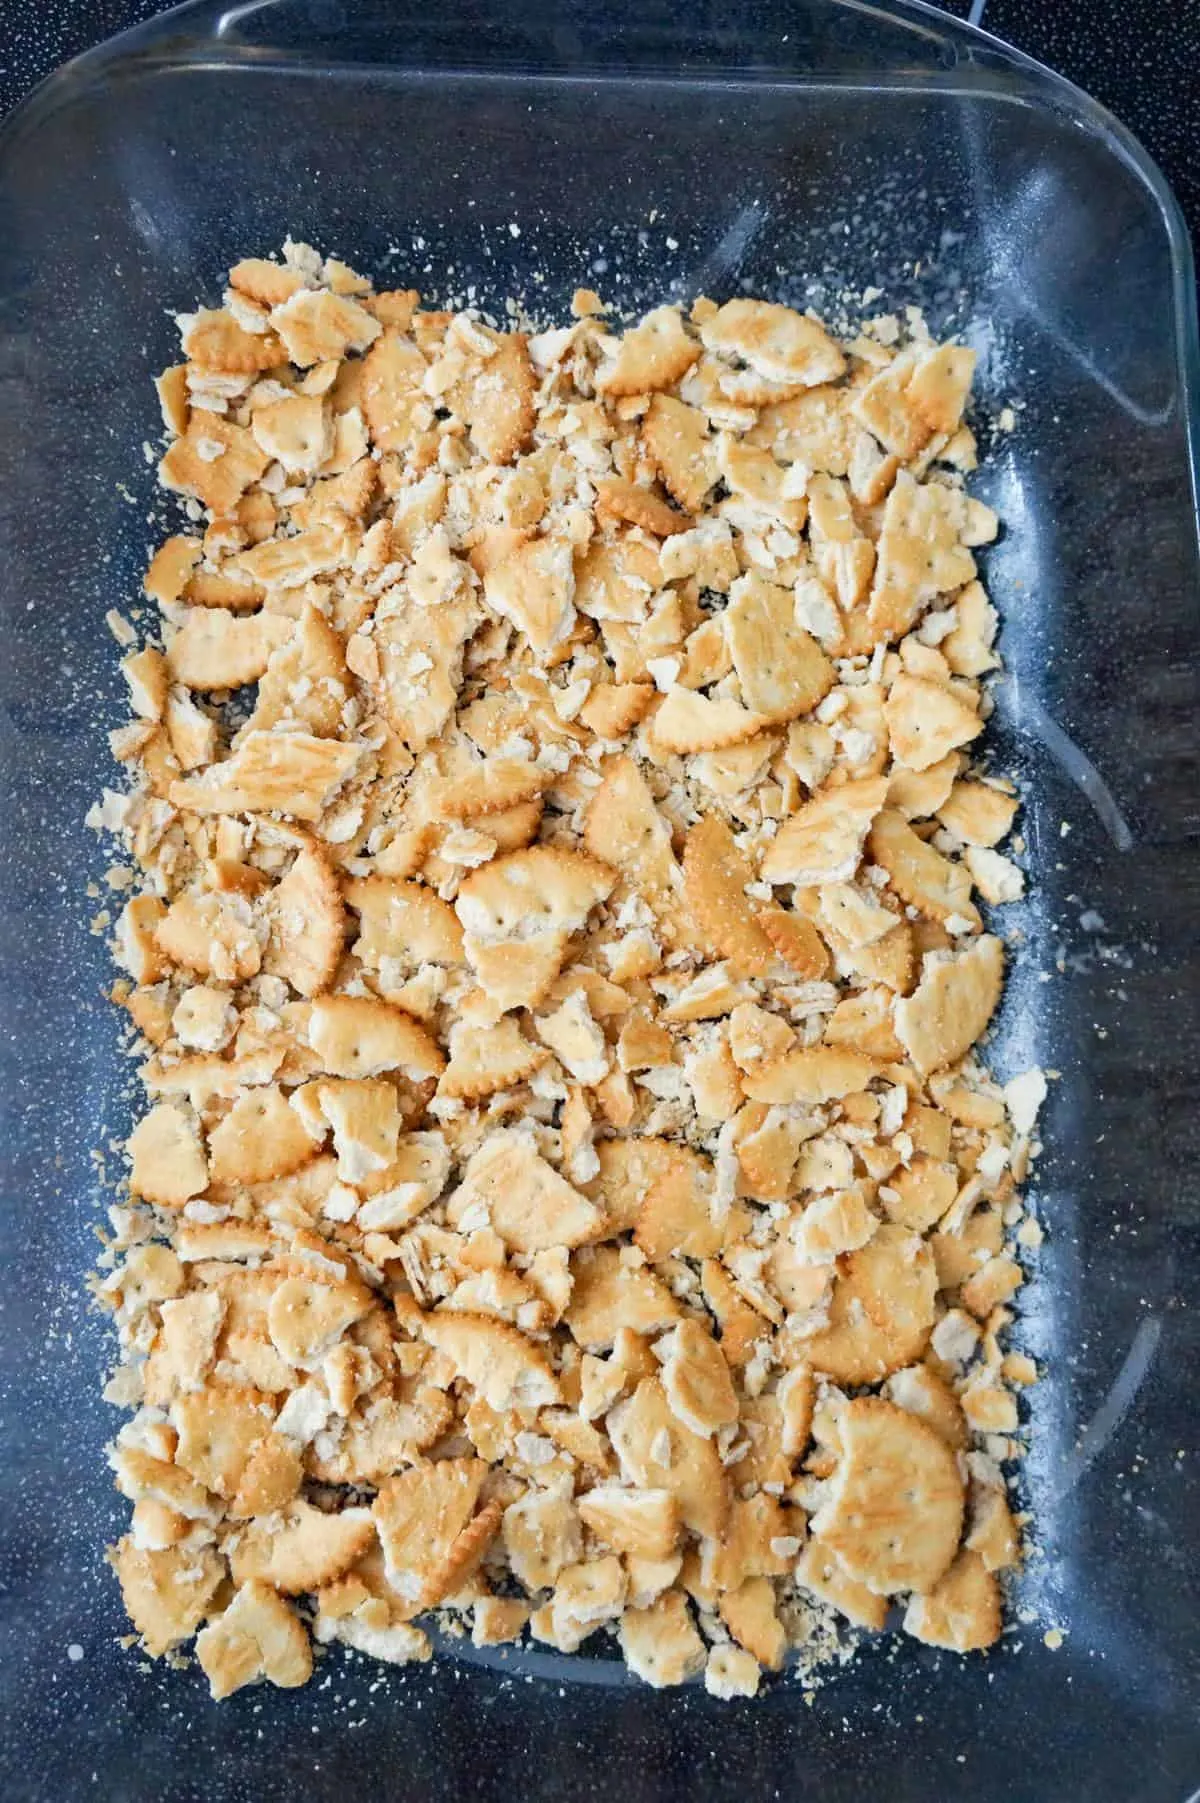 crumbled Ritz crackers in the bottom of a baking dish